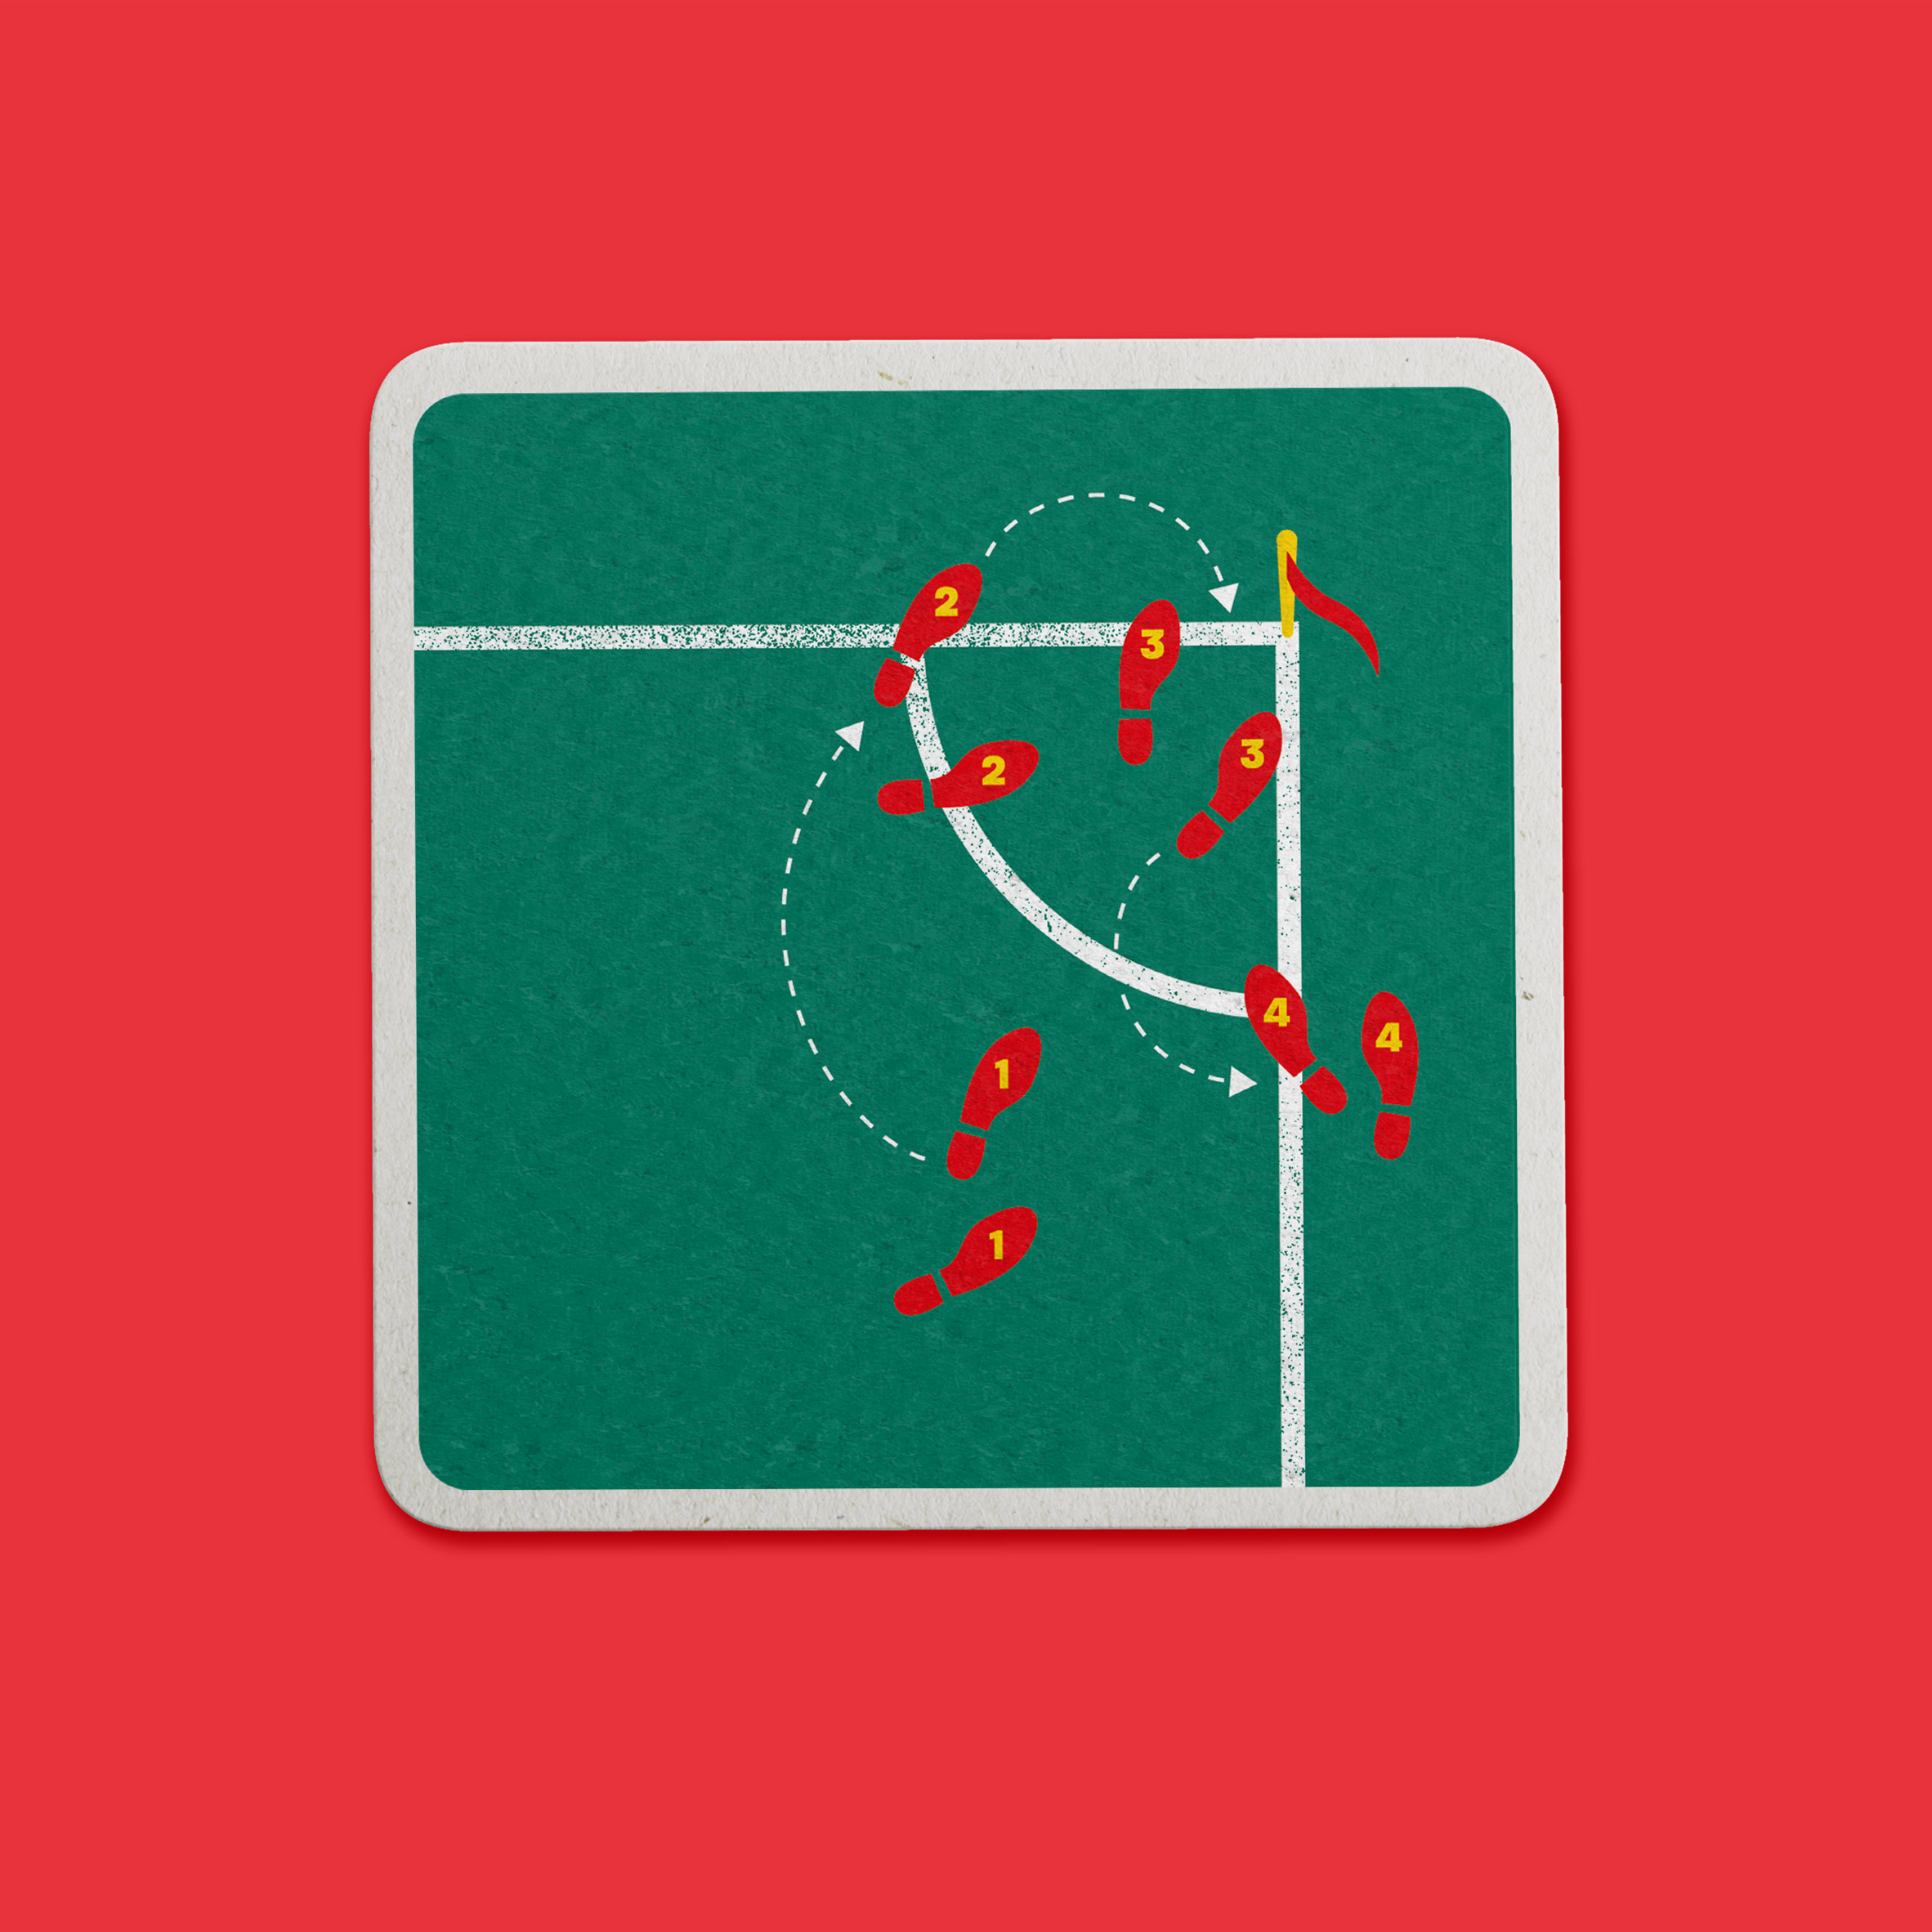 BEER MAT x 4 Details about   BRANCOTT RUGBY WORLD CUP 2011 COASTER